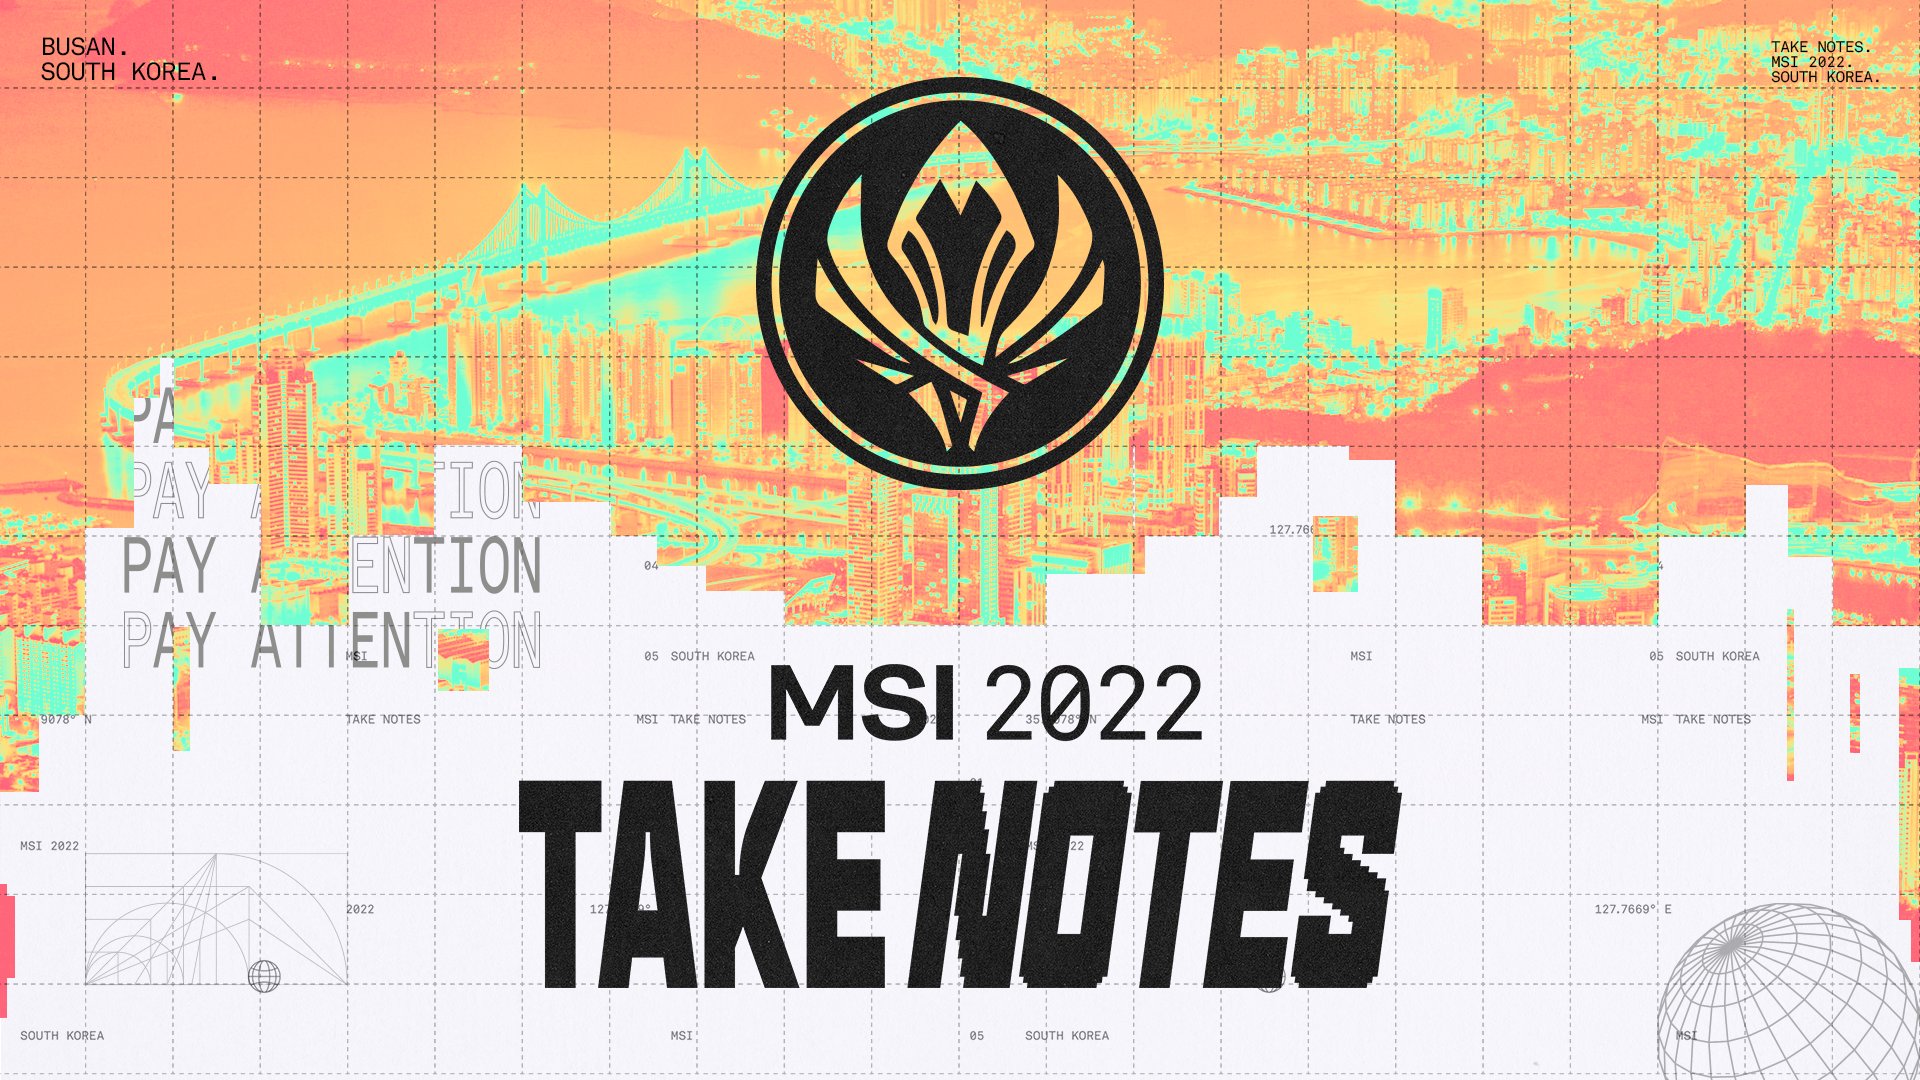 Riot confirms MSI 2022 will take place in Busan, South Korea, and feature a live audience